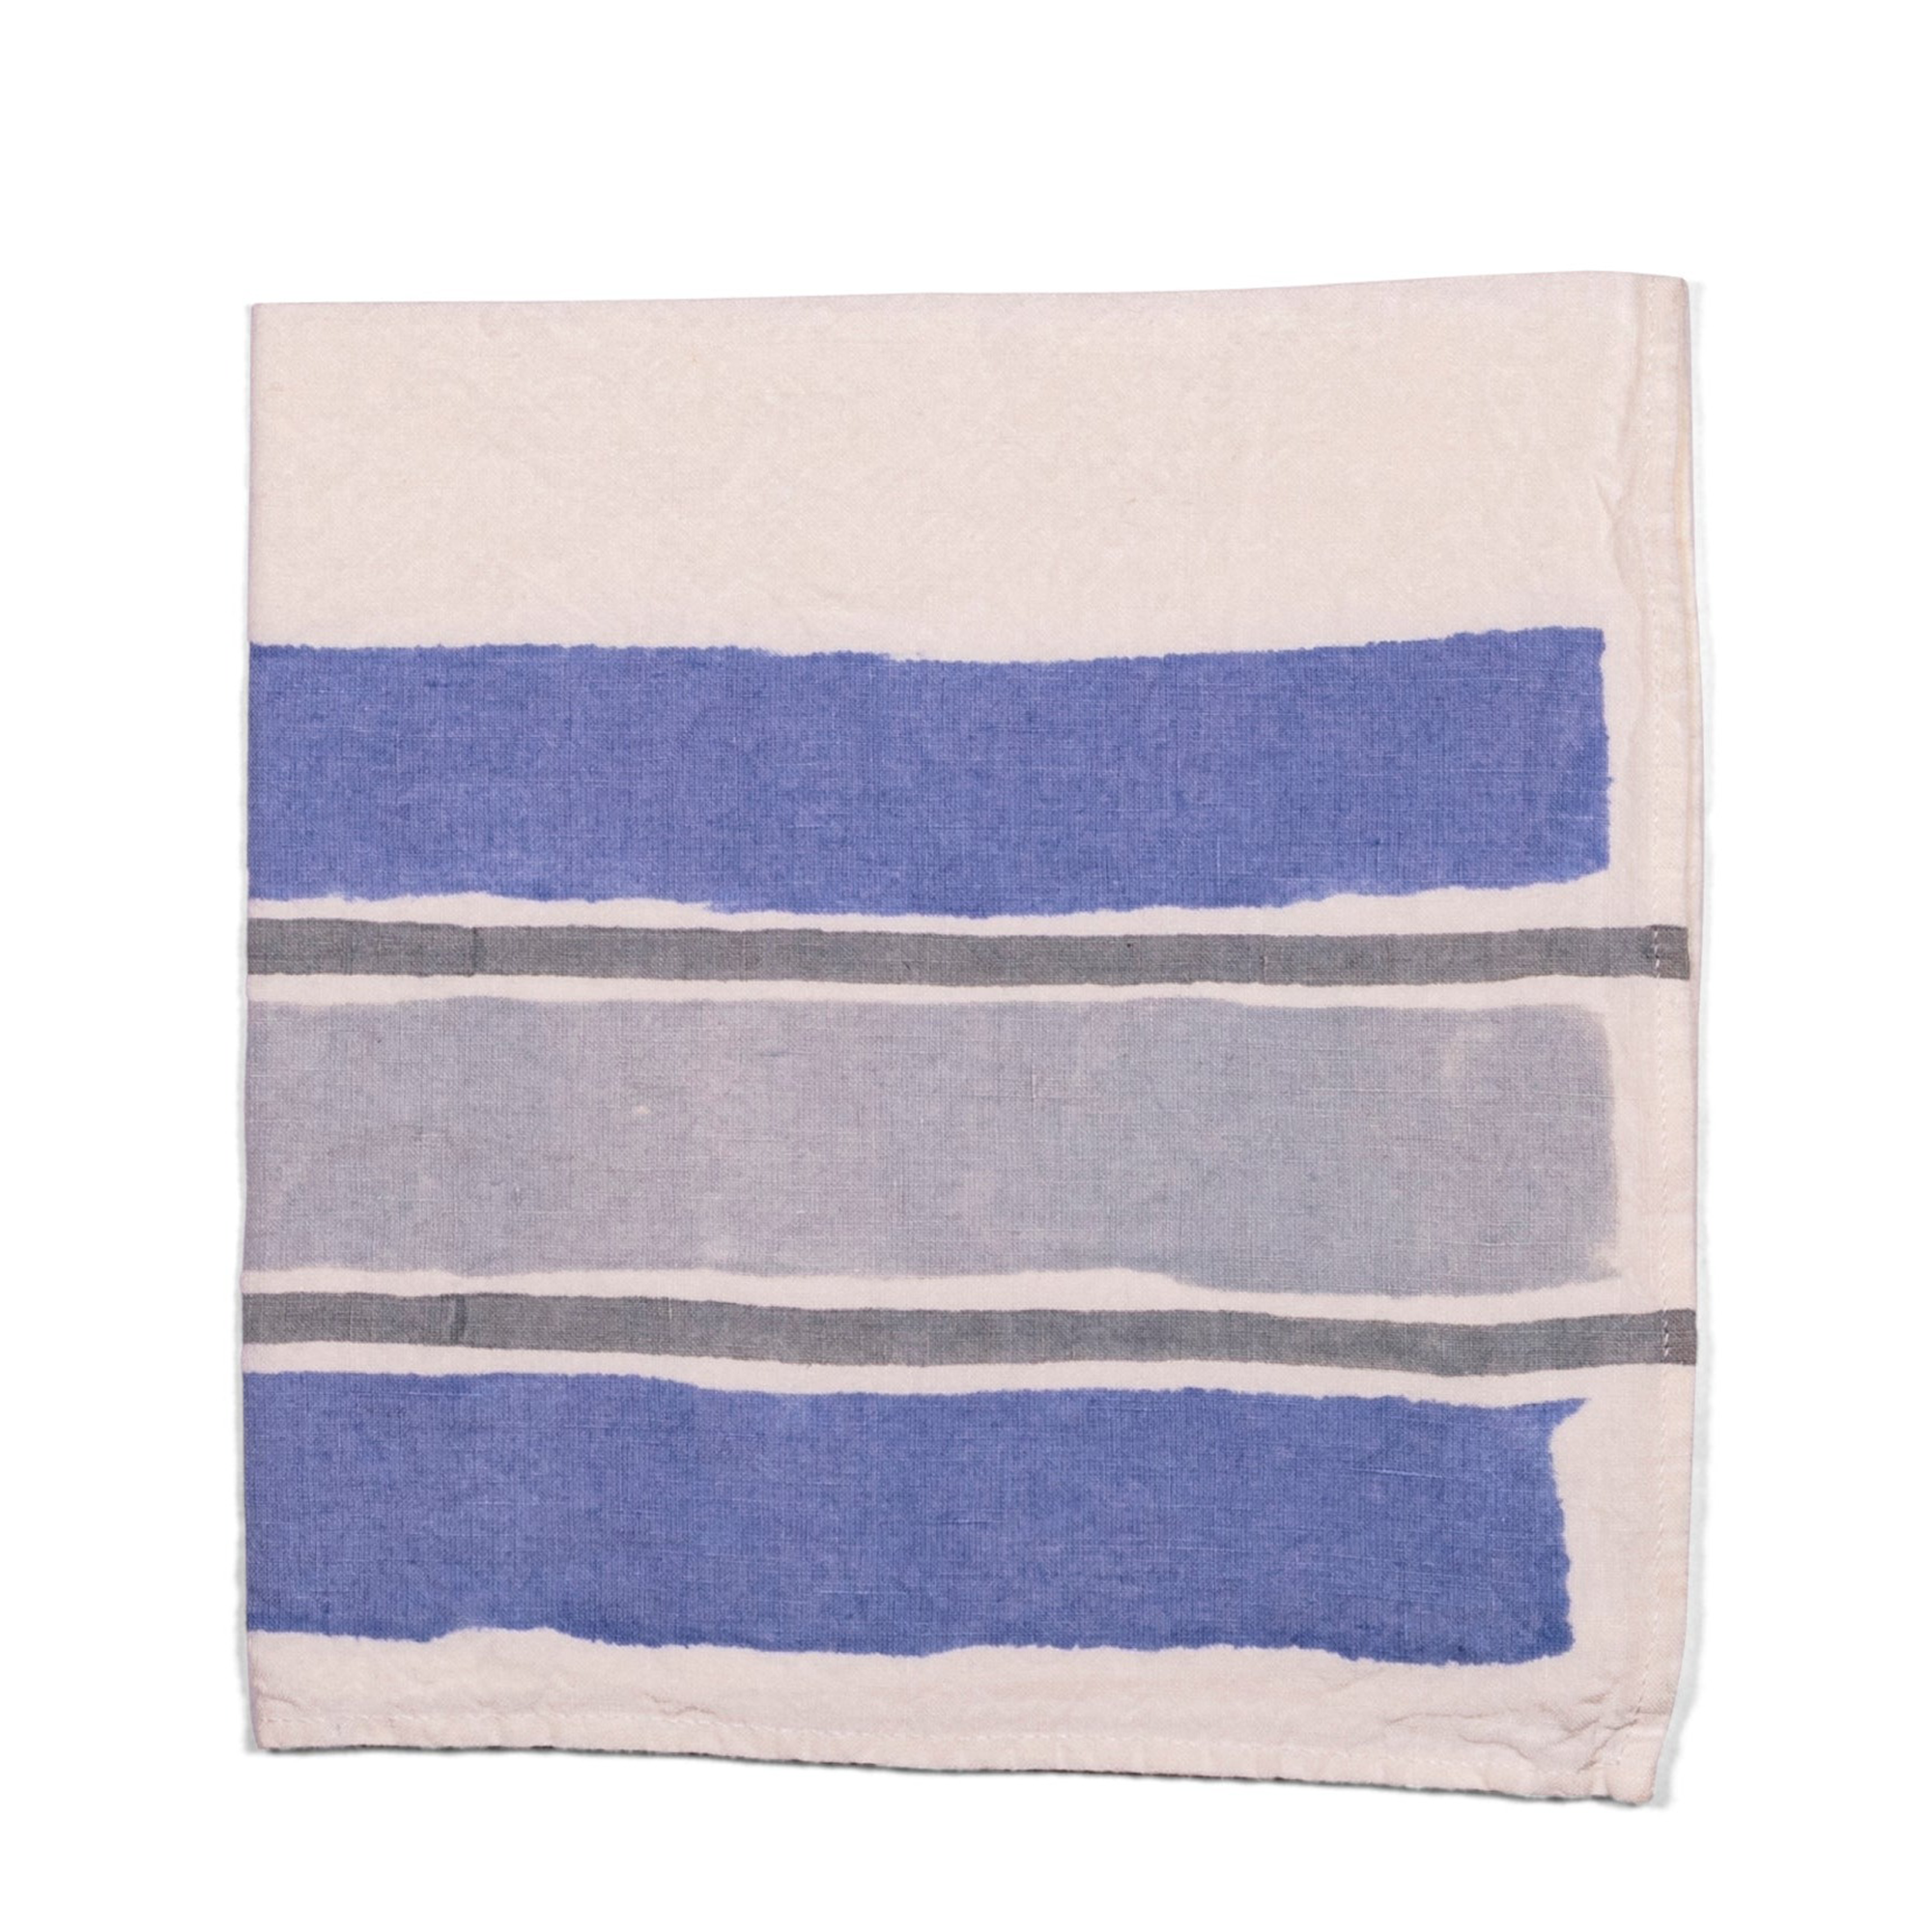 A 100% linen white napkin, with darker blue and grey stripes, handmade of pear wood. Perfect for breakfast, formal dining, or a garden tablescape.